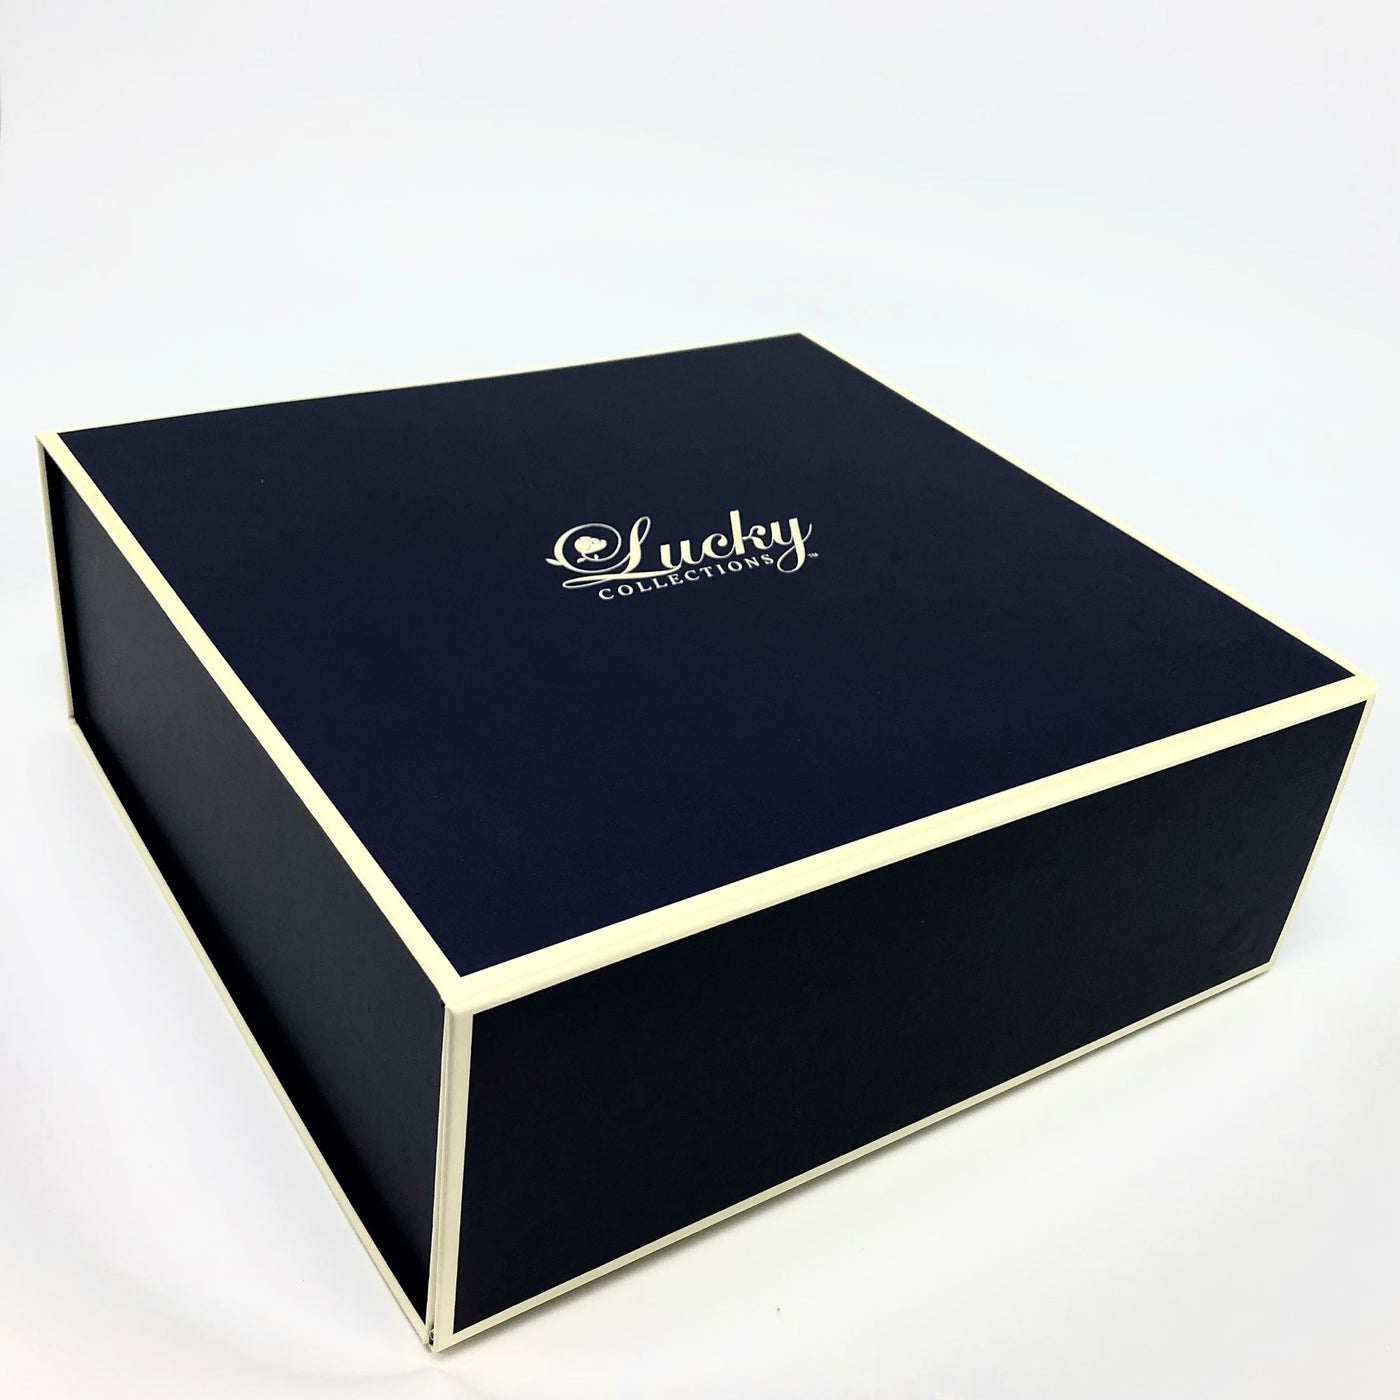 Each Lucky Collections ™ tiara comes in custom box for convenient presentation and keepsake.